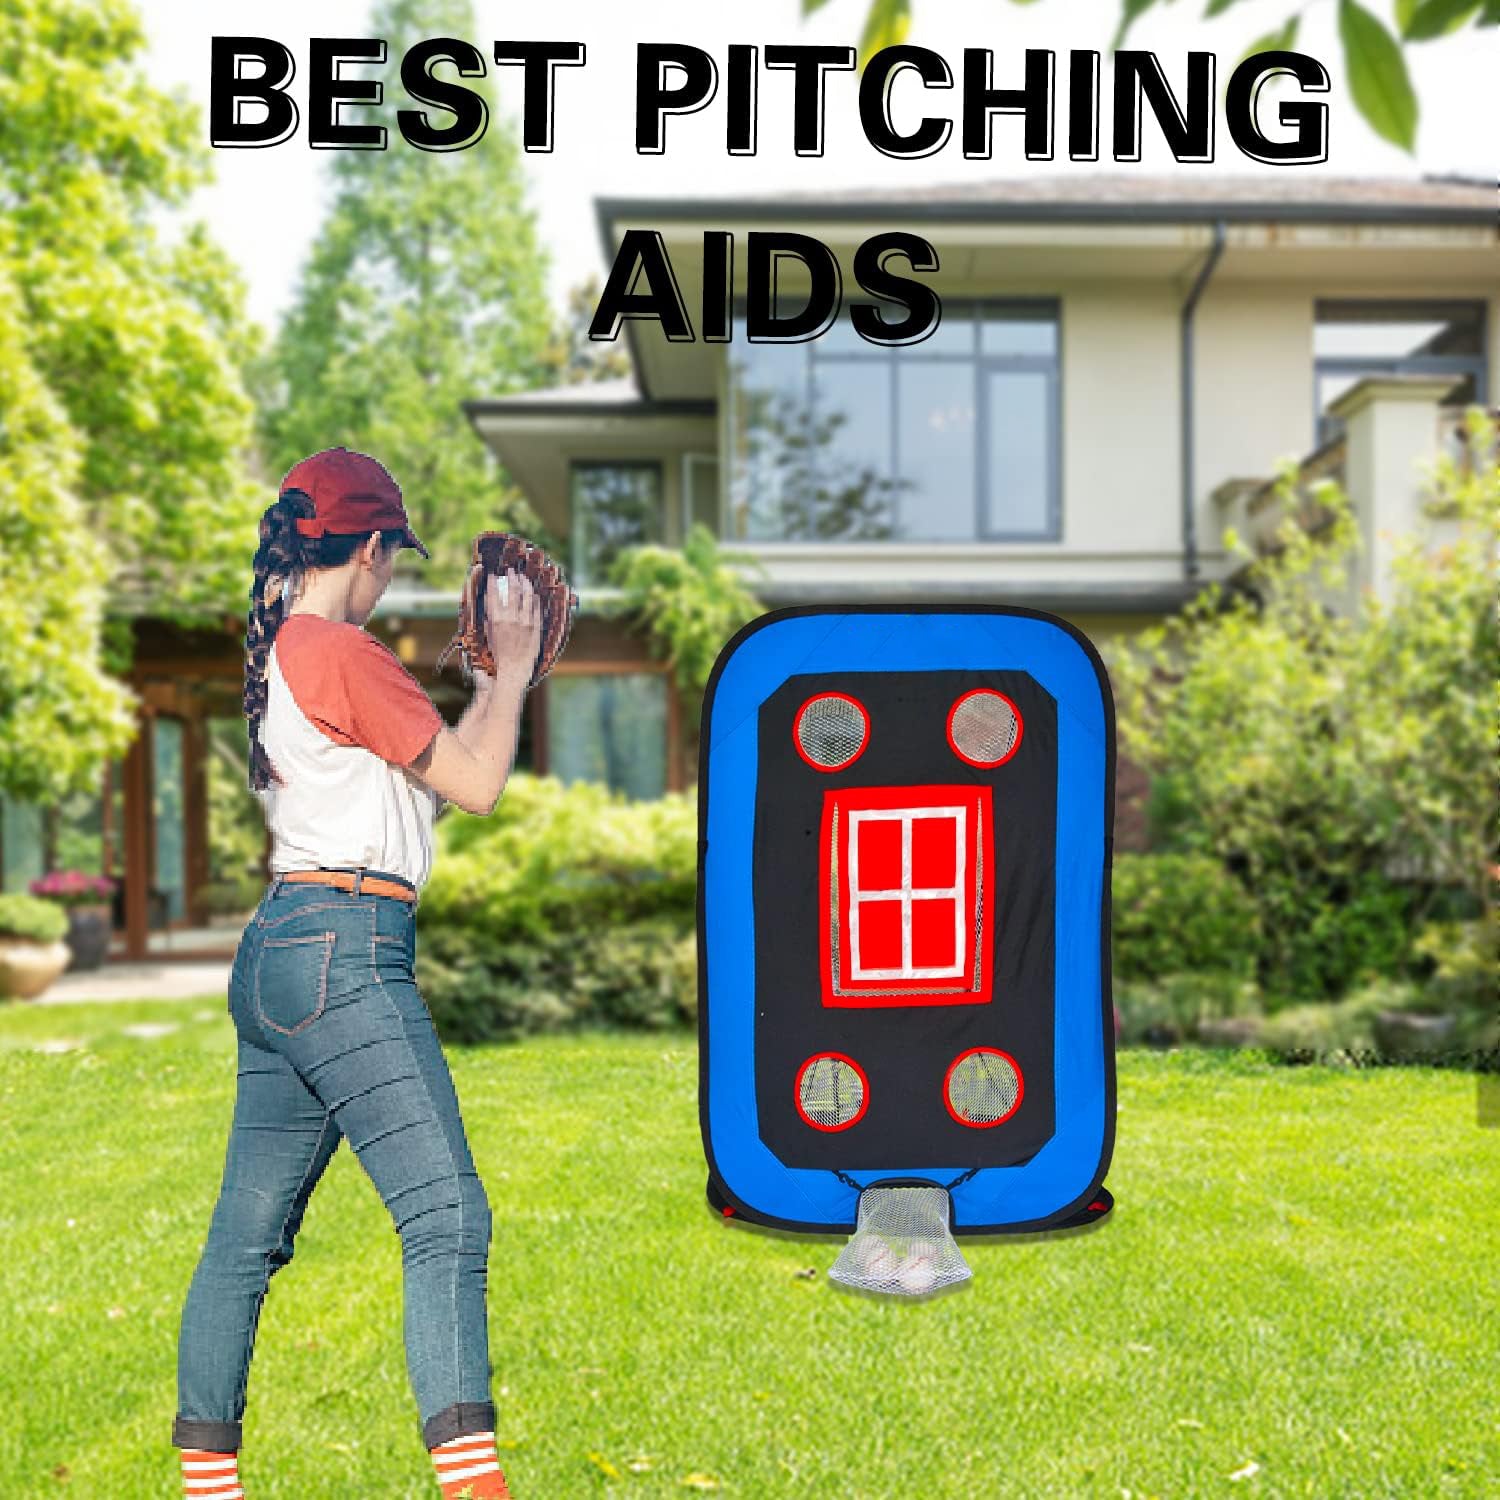 Baseball Pitching Net for Kids Youth Pop Up Pitching Practice Target Trainer Portable Foldable Strike Zone Baseball Target for Pitcher Catcher 5 Hole Softball Training Equipment Indoor Outdoor